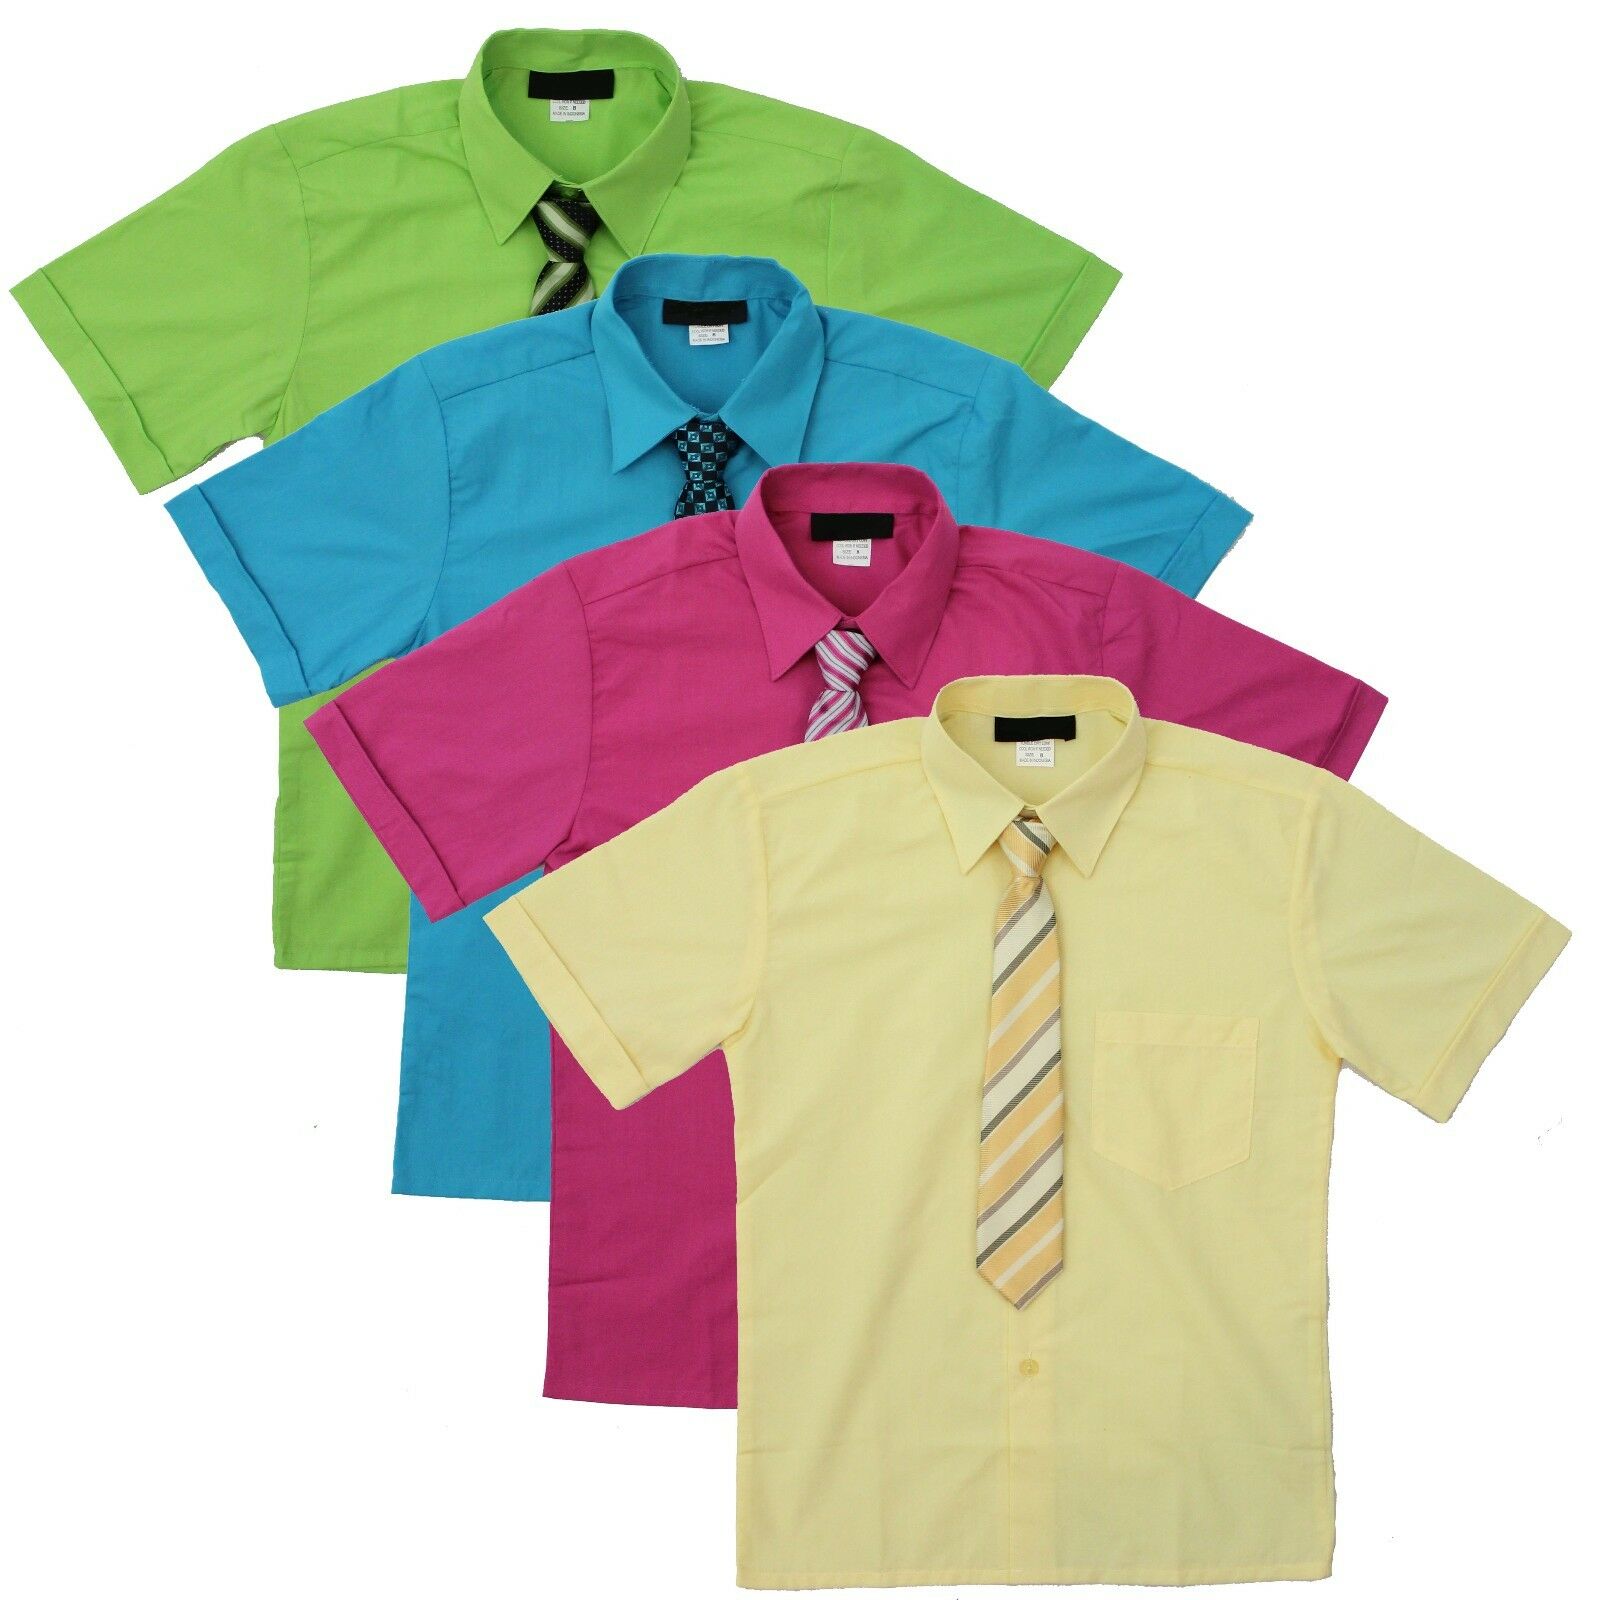 Boy's Short Sleeve Dress Shirt With Tie Set  Sizes 2t To 14